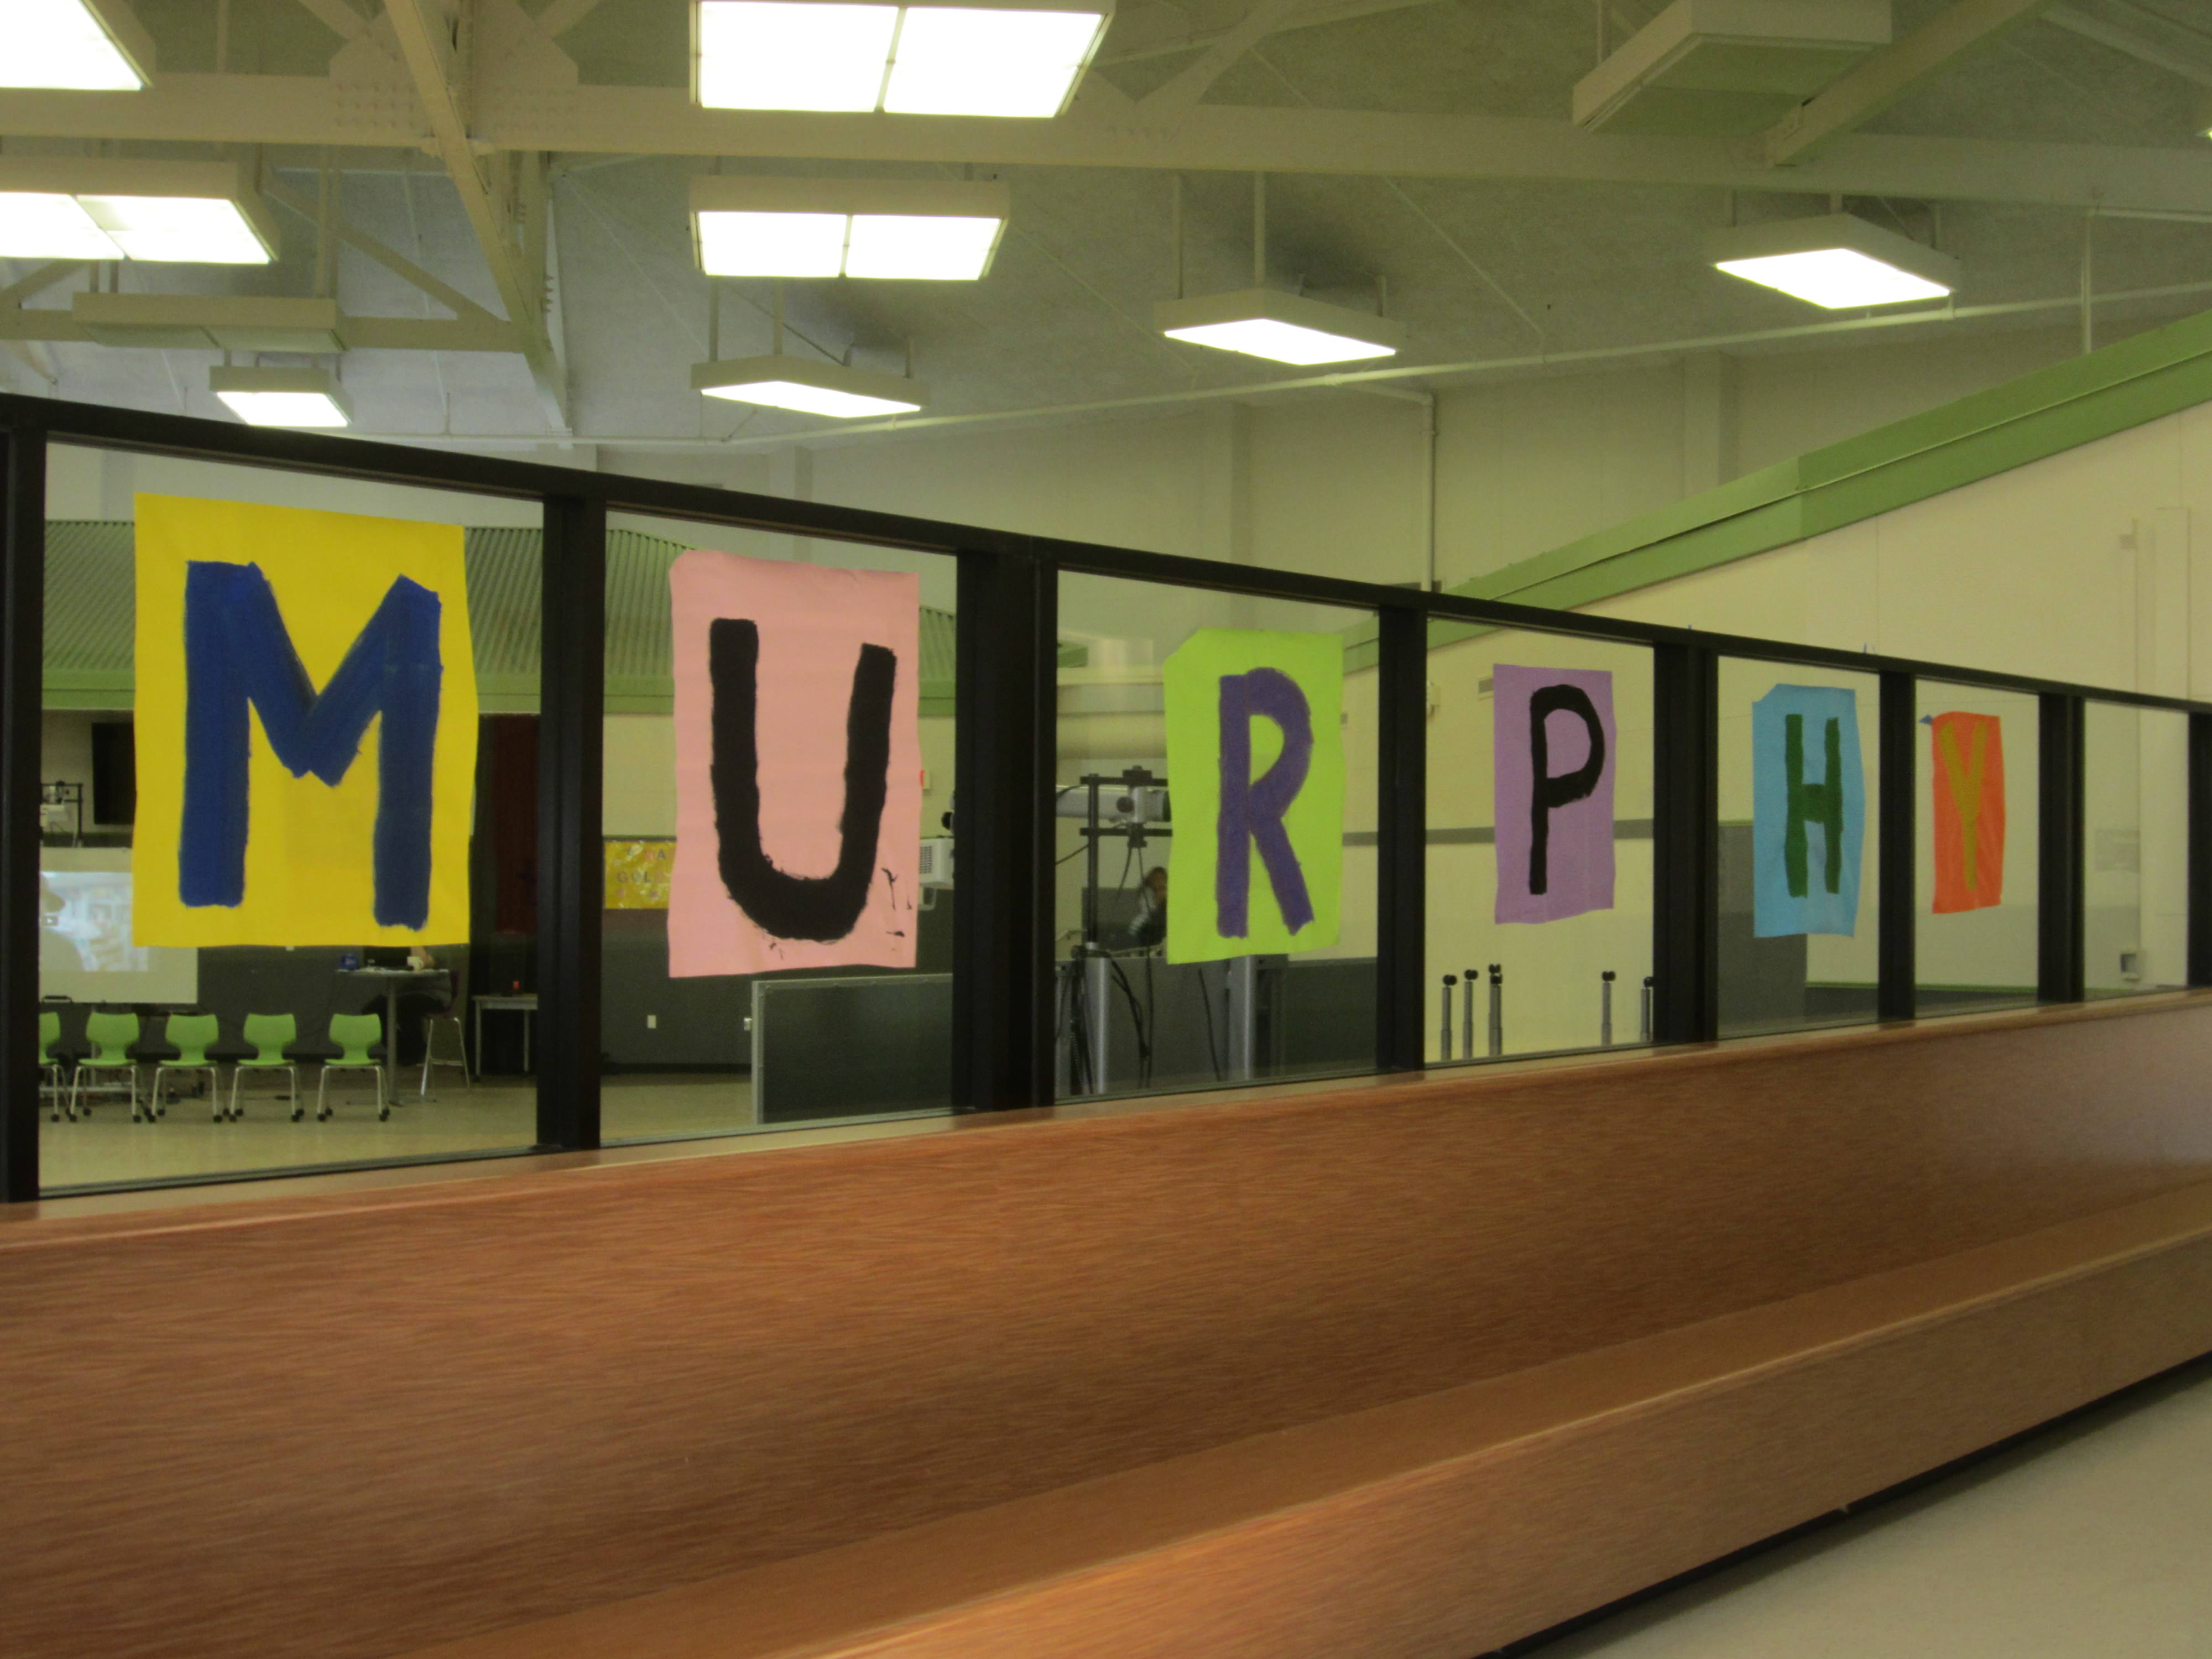 murphy letters pic Image